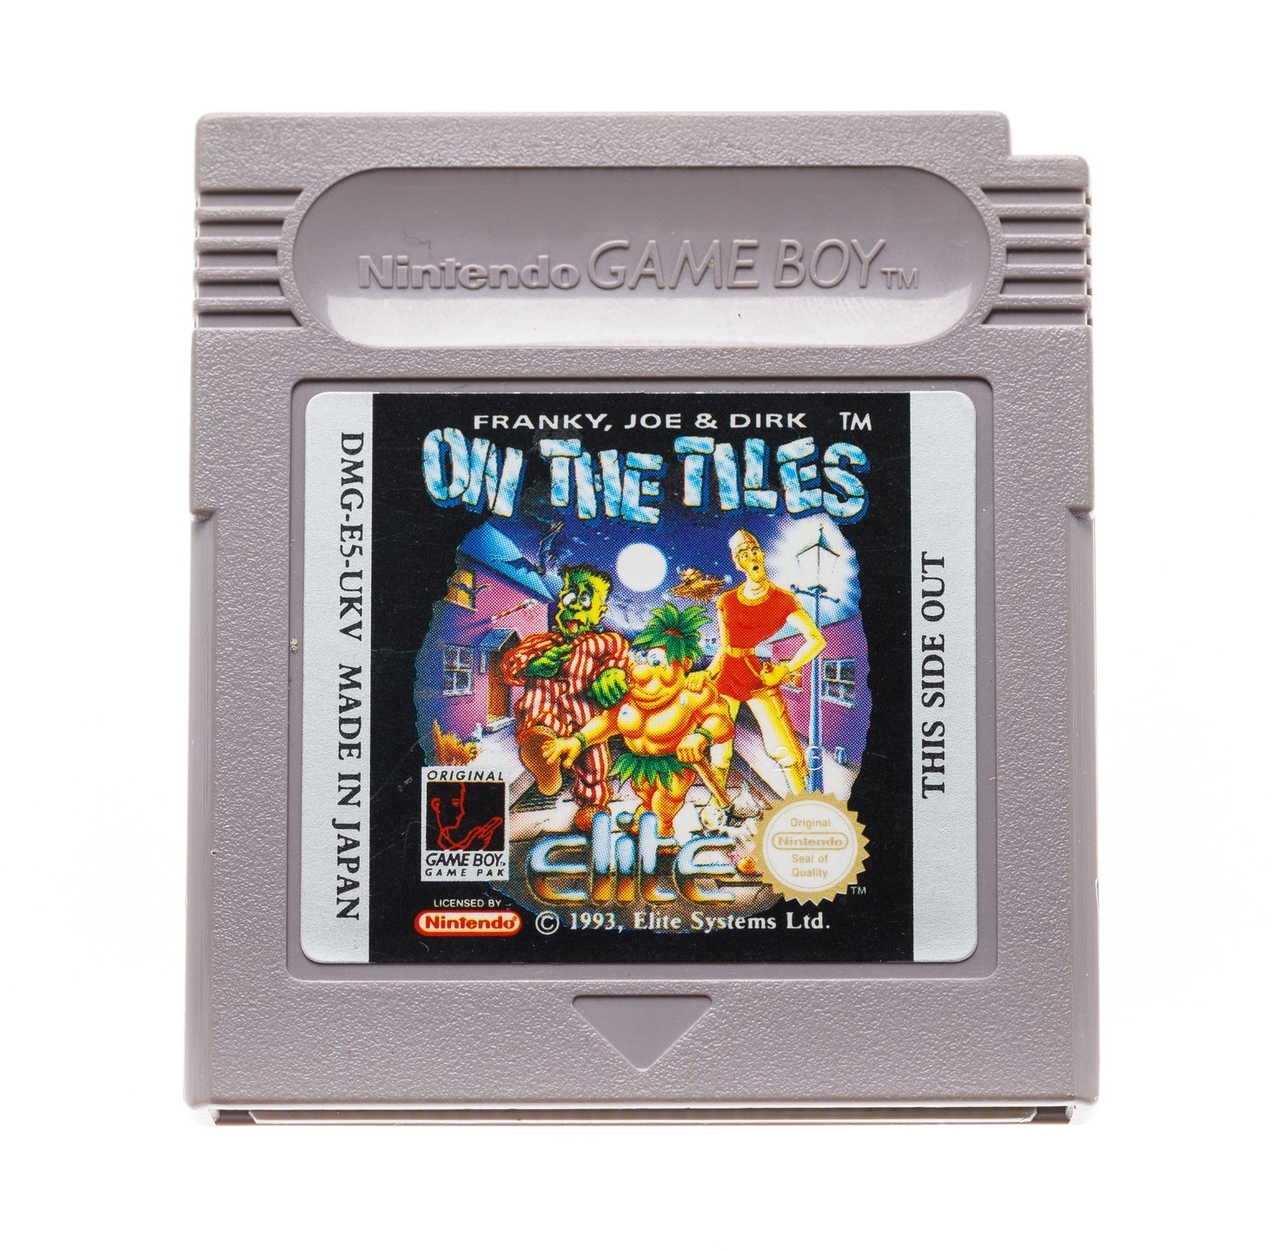 Franky, Joe & Dirk: On the Tiles - Gameboy Classic Games